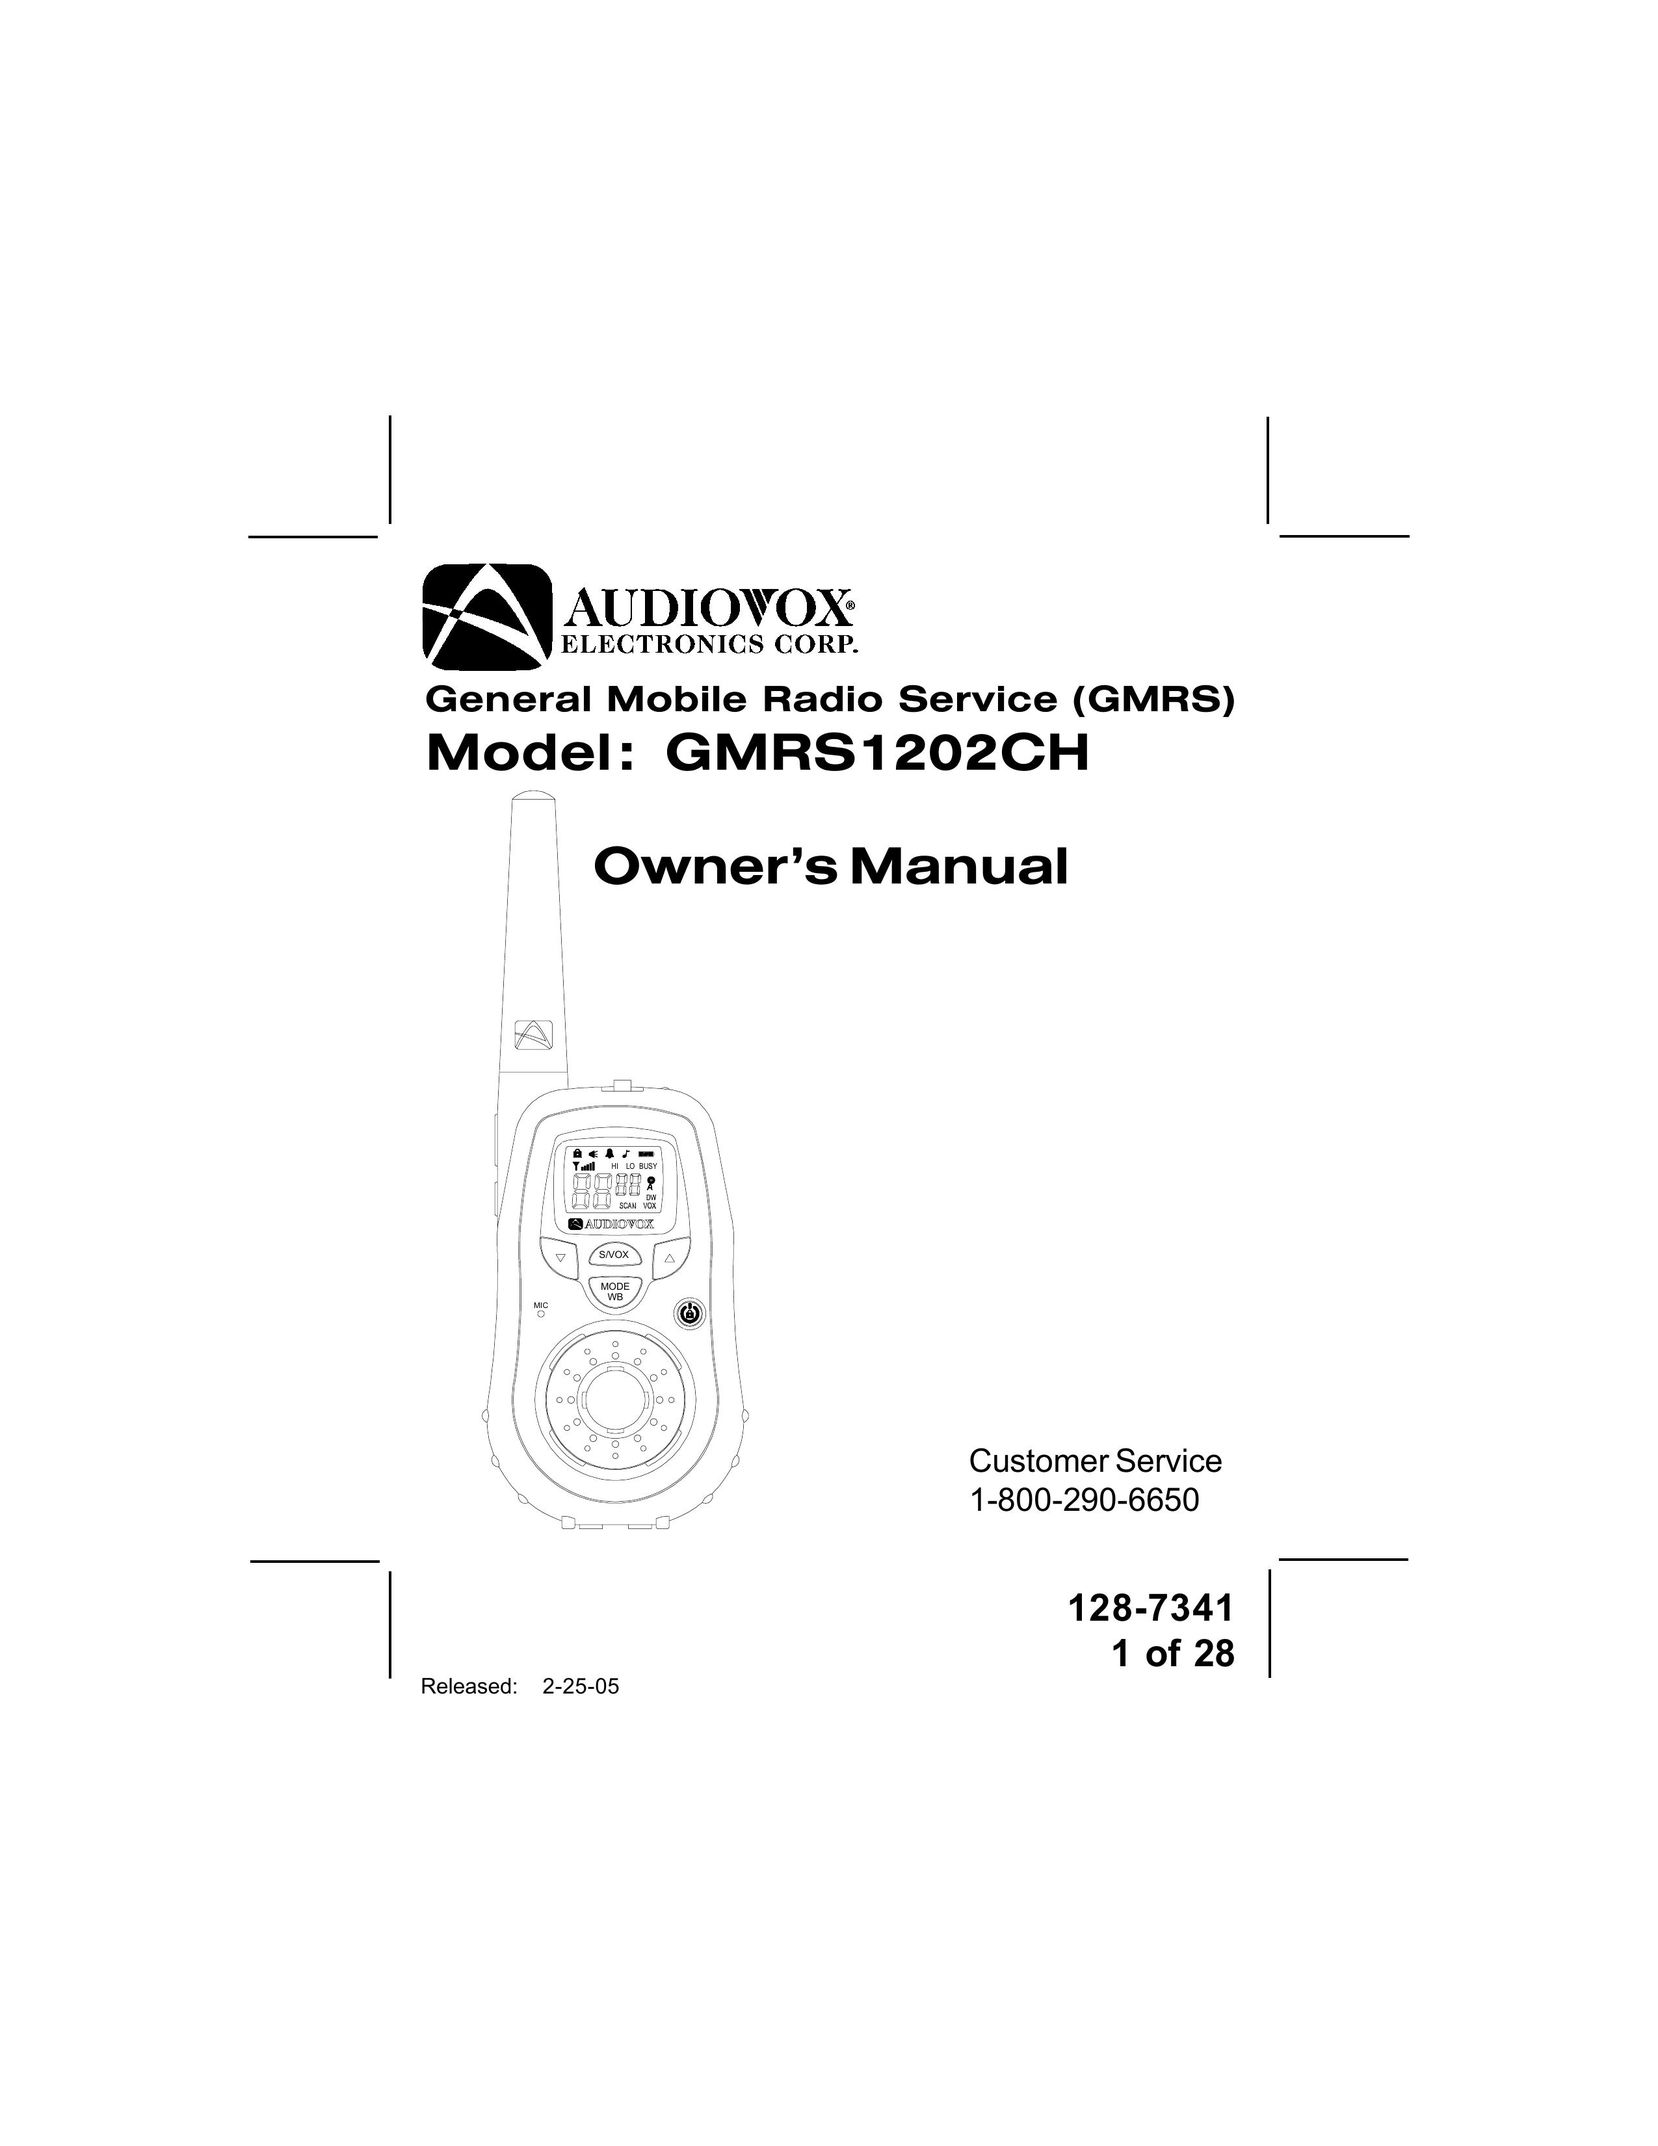 Audiovox GMRS1202CH Two-Way Radio User Manual